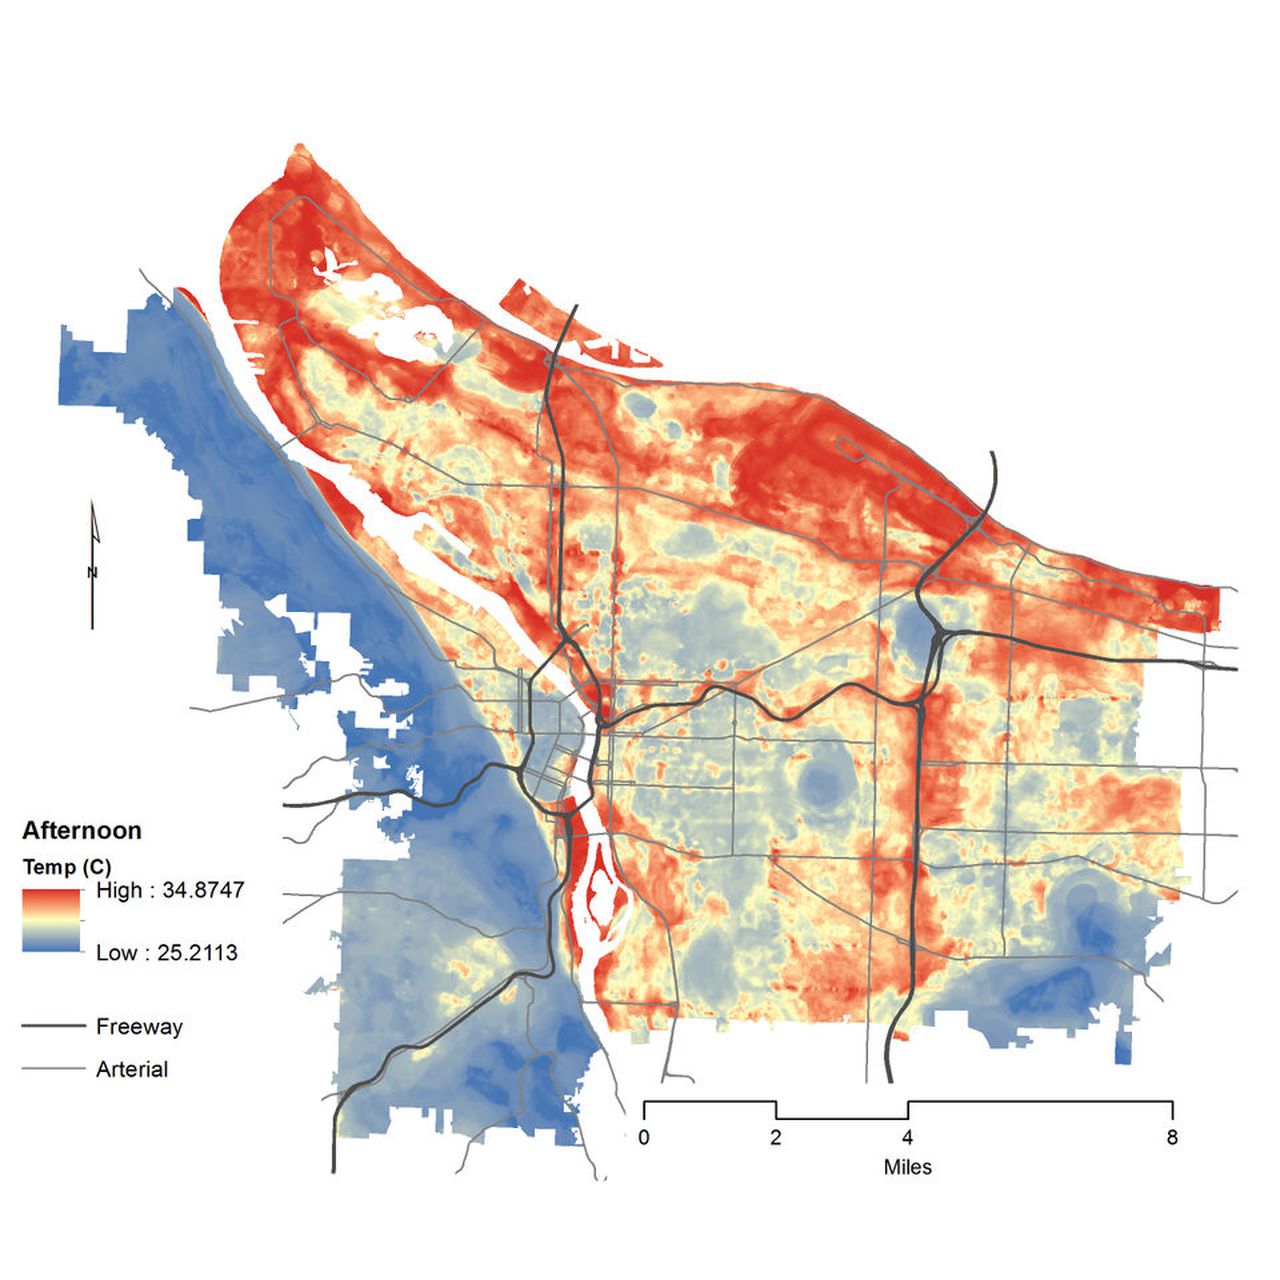 A map showing gradations of temperature within the city of Portland